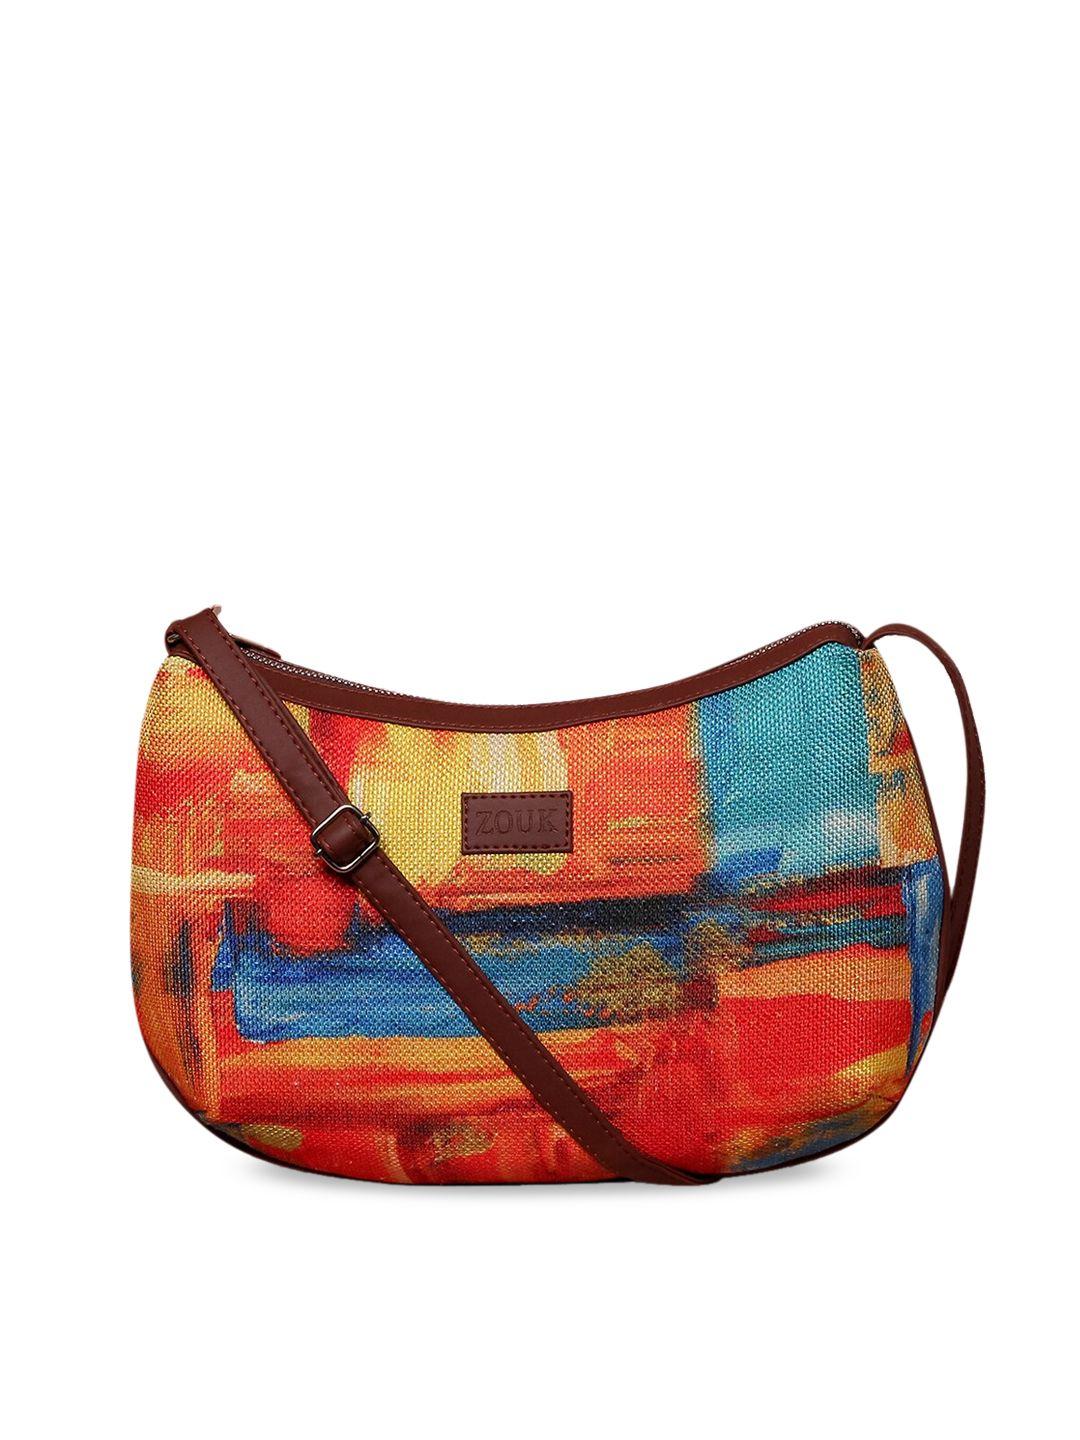 zouk yellow printed structured shoulder bag